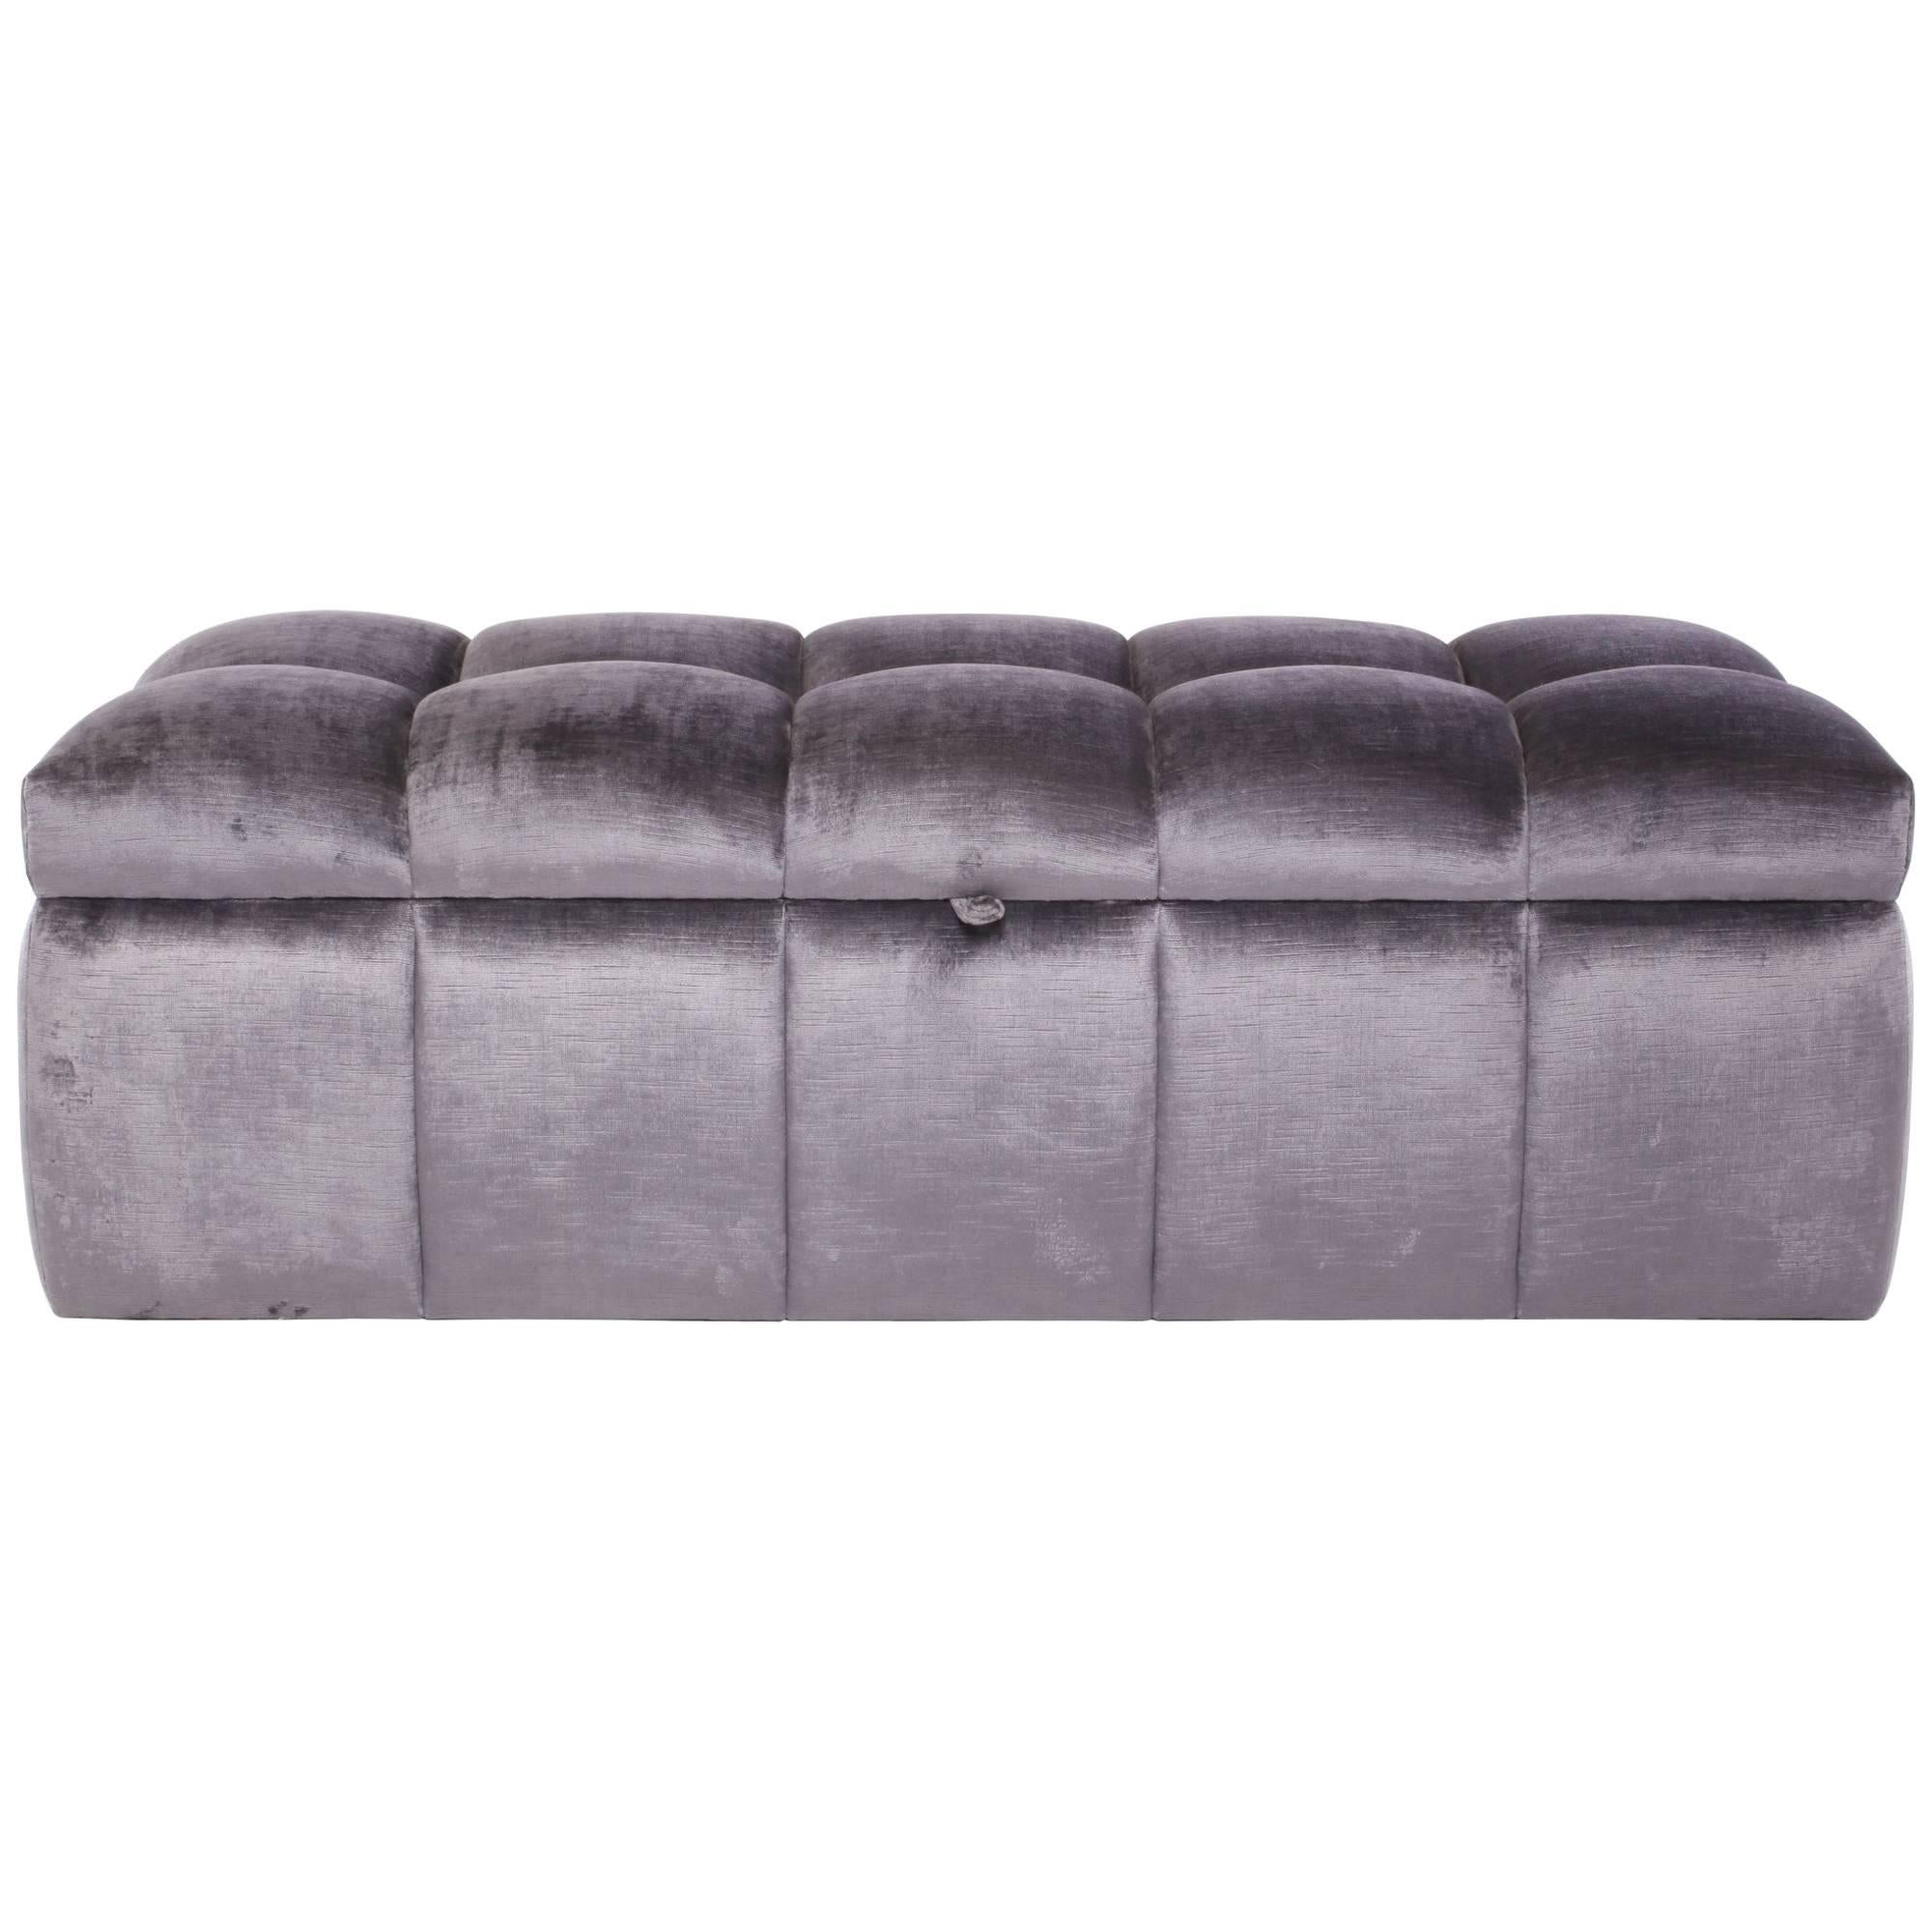 Tufted Storage Ottoman For Sale